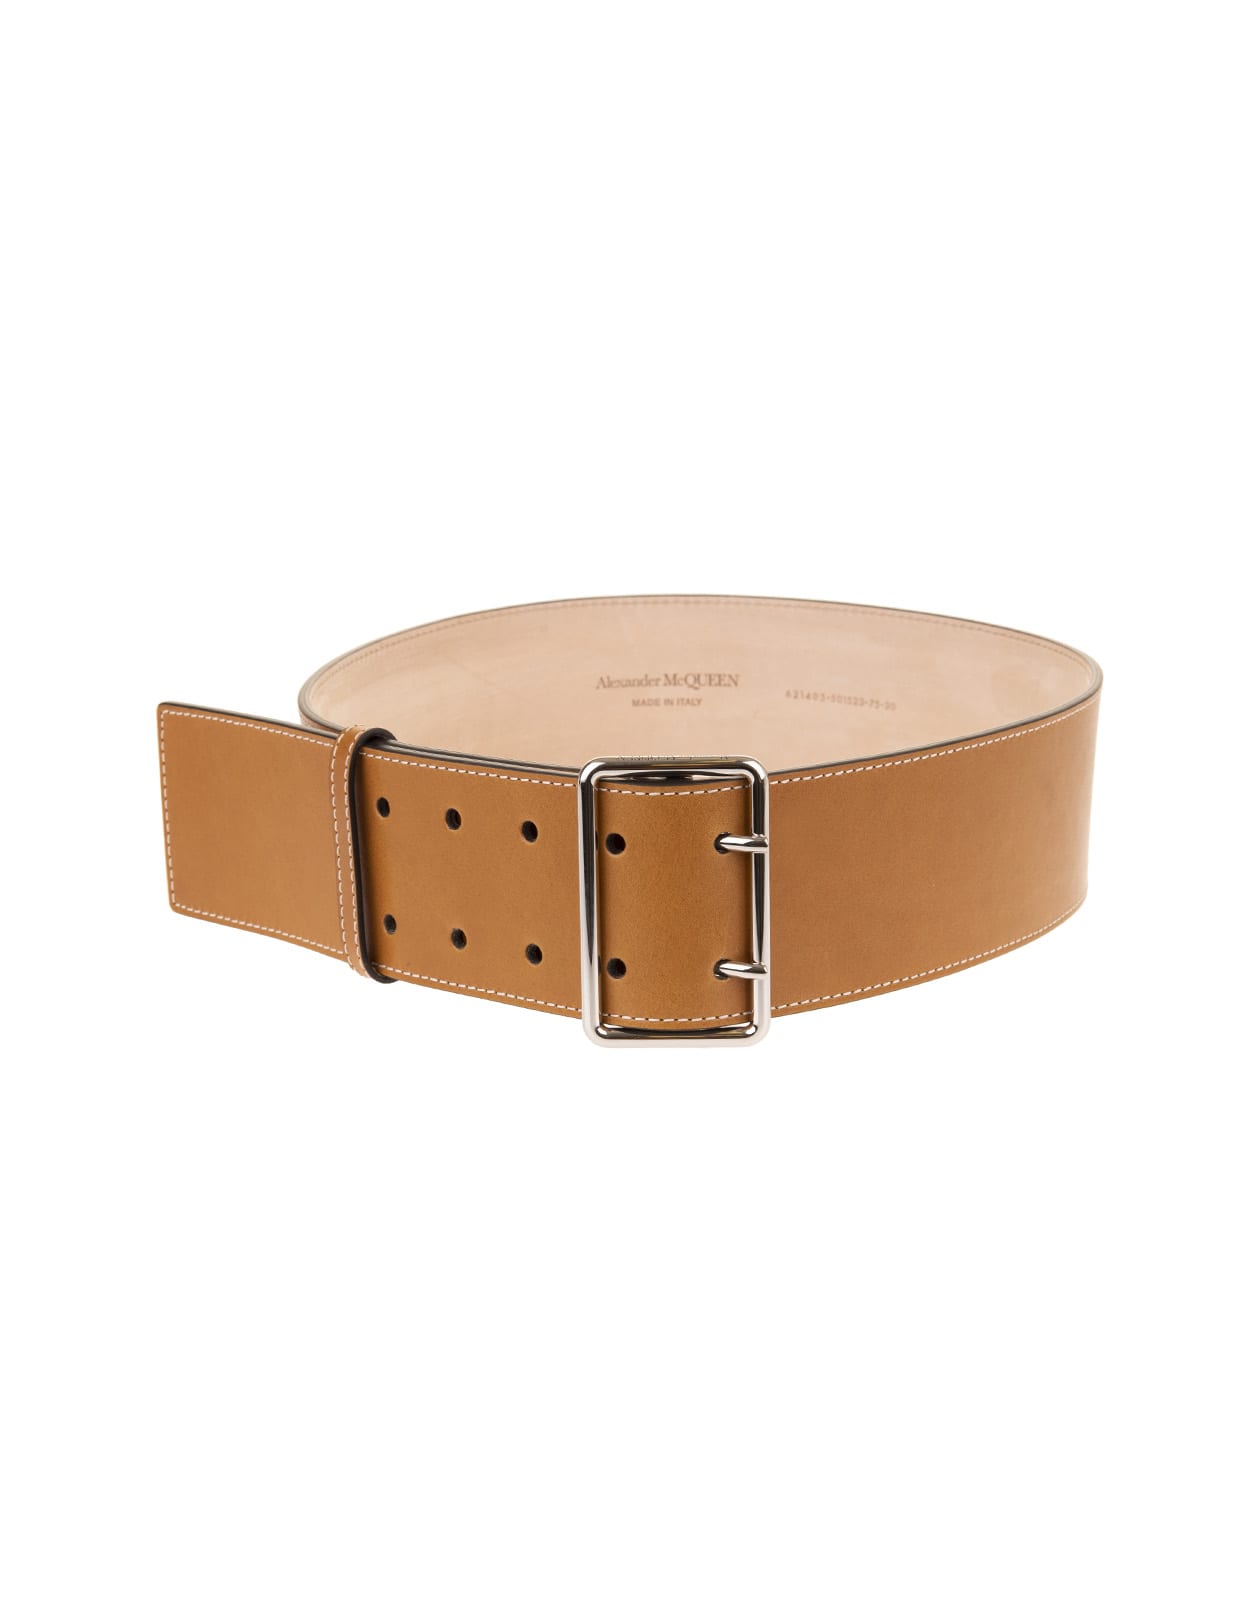 Alexander McQueen Woman Brown And Silver Military Belt